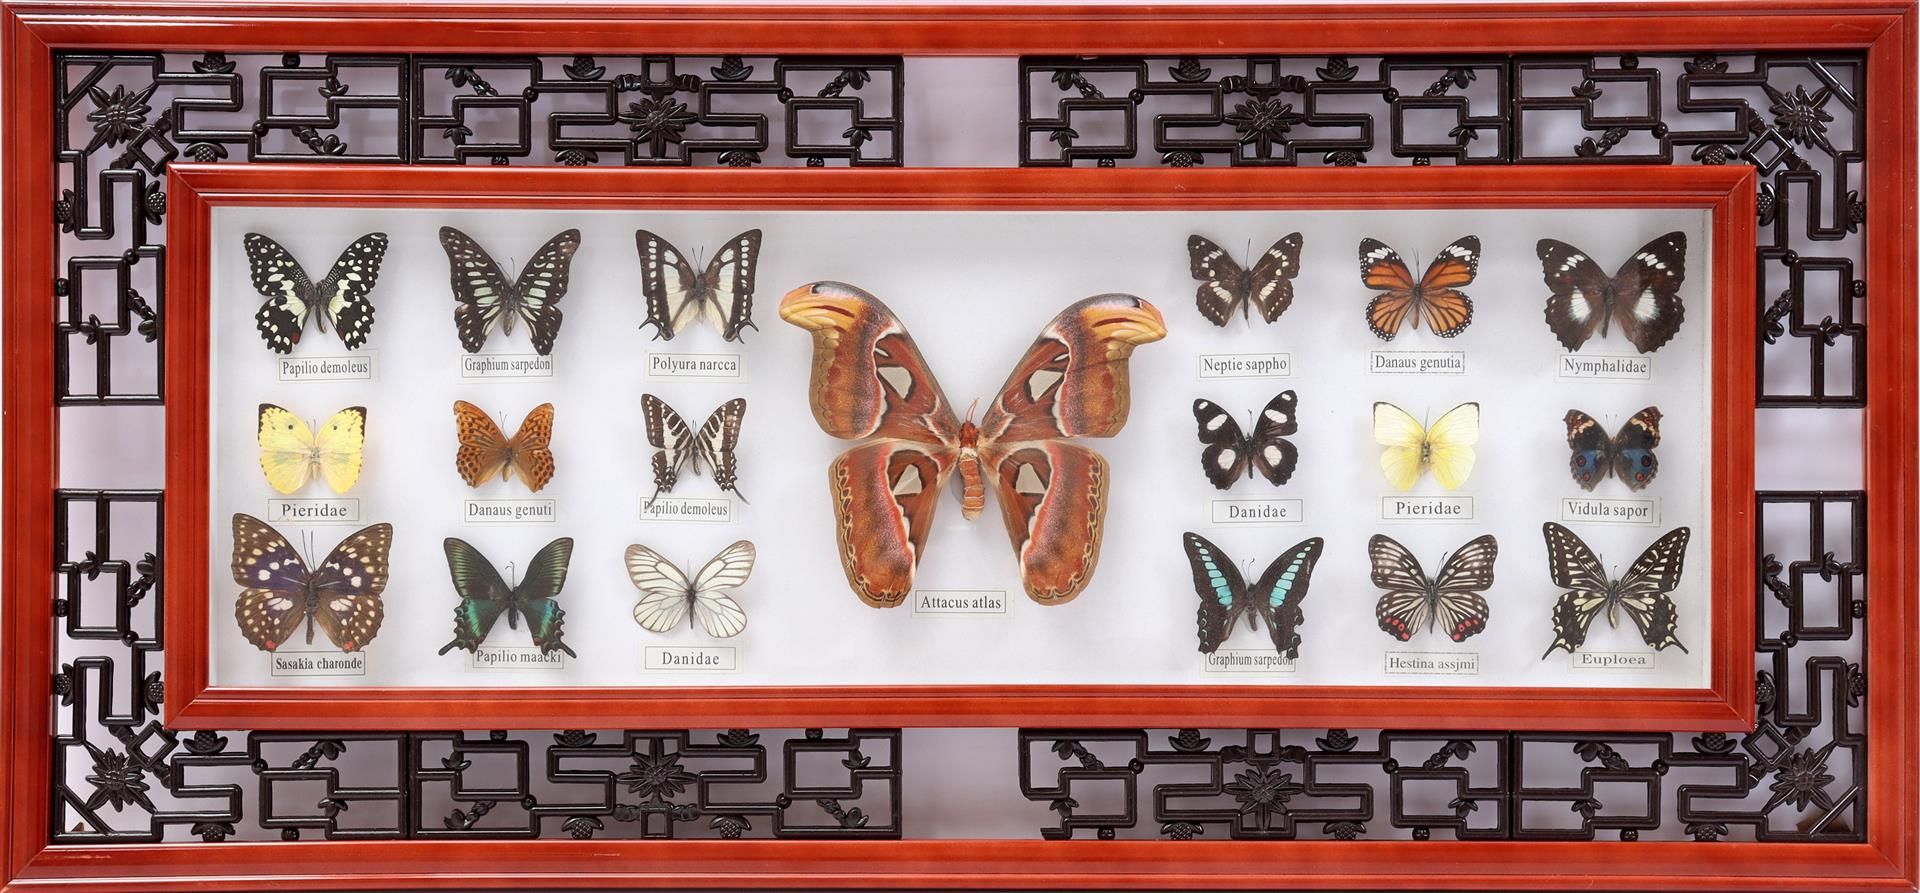 Wall decoration of 19 prepared butterflies - Image 2 of 2